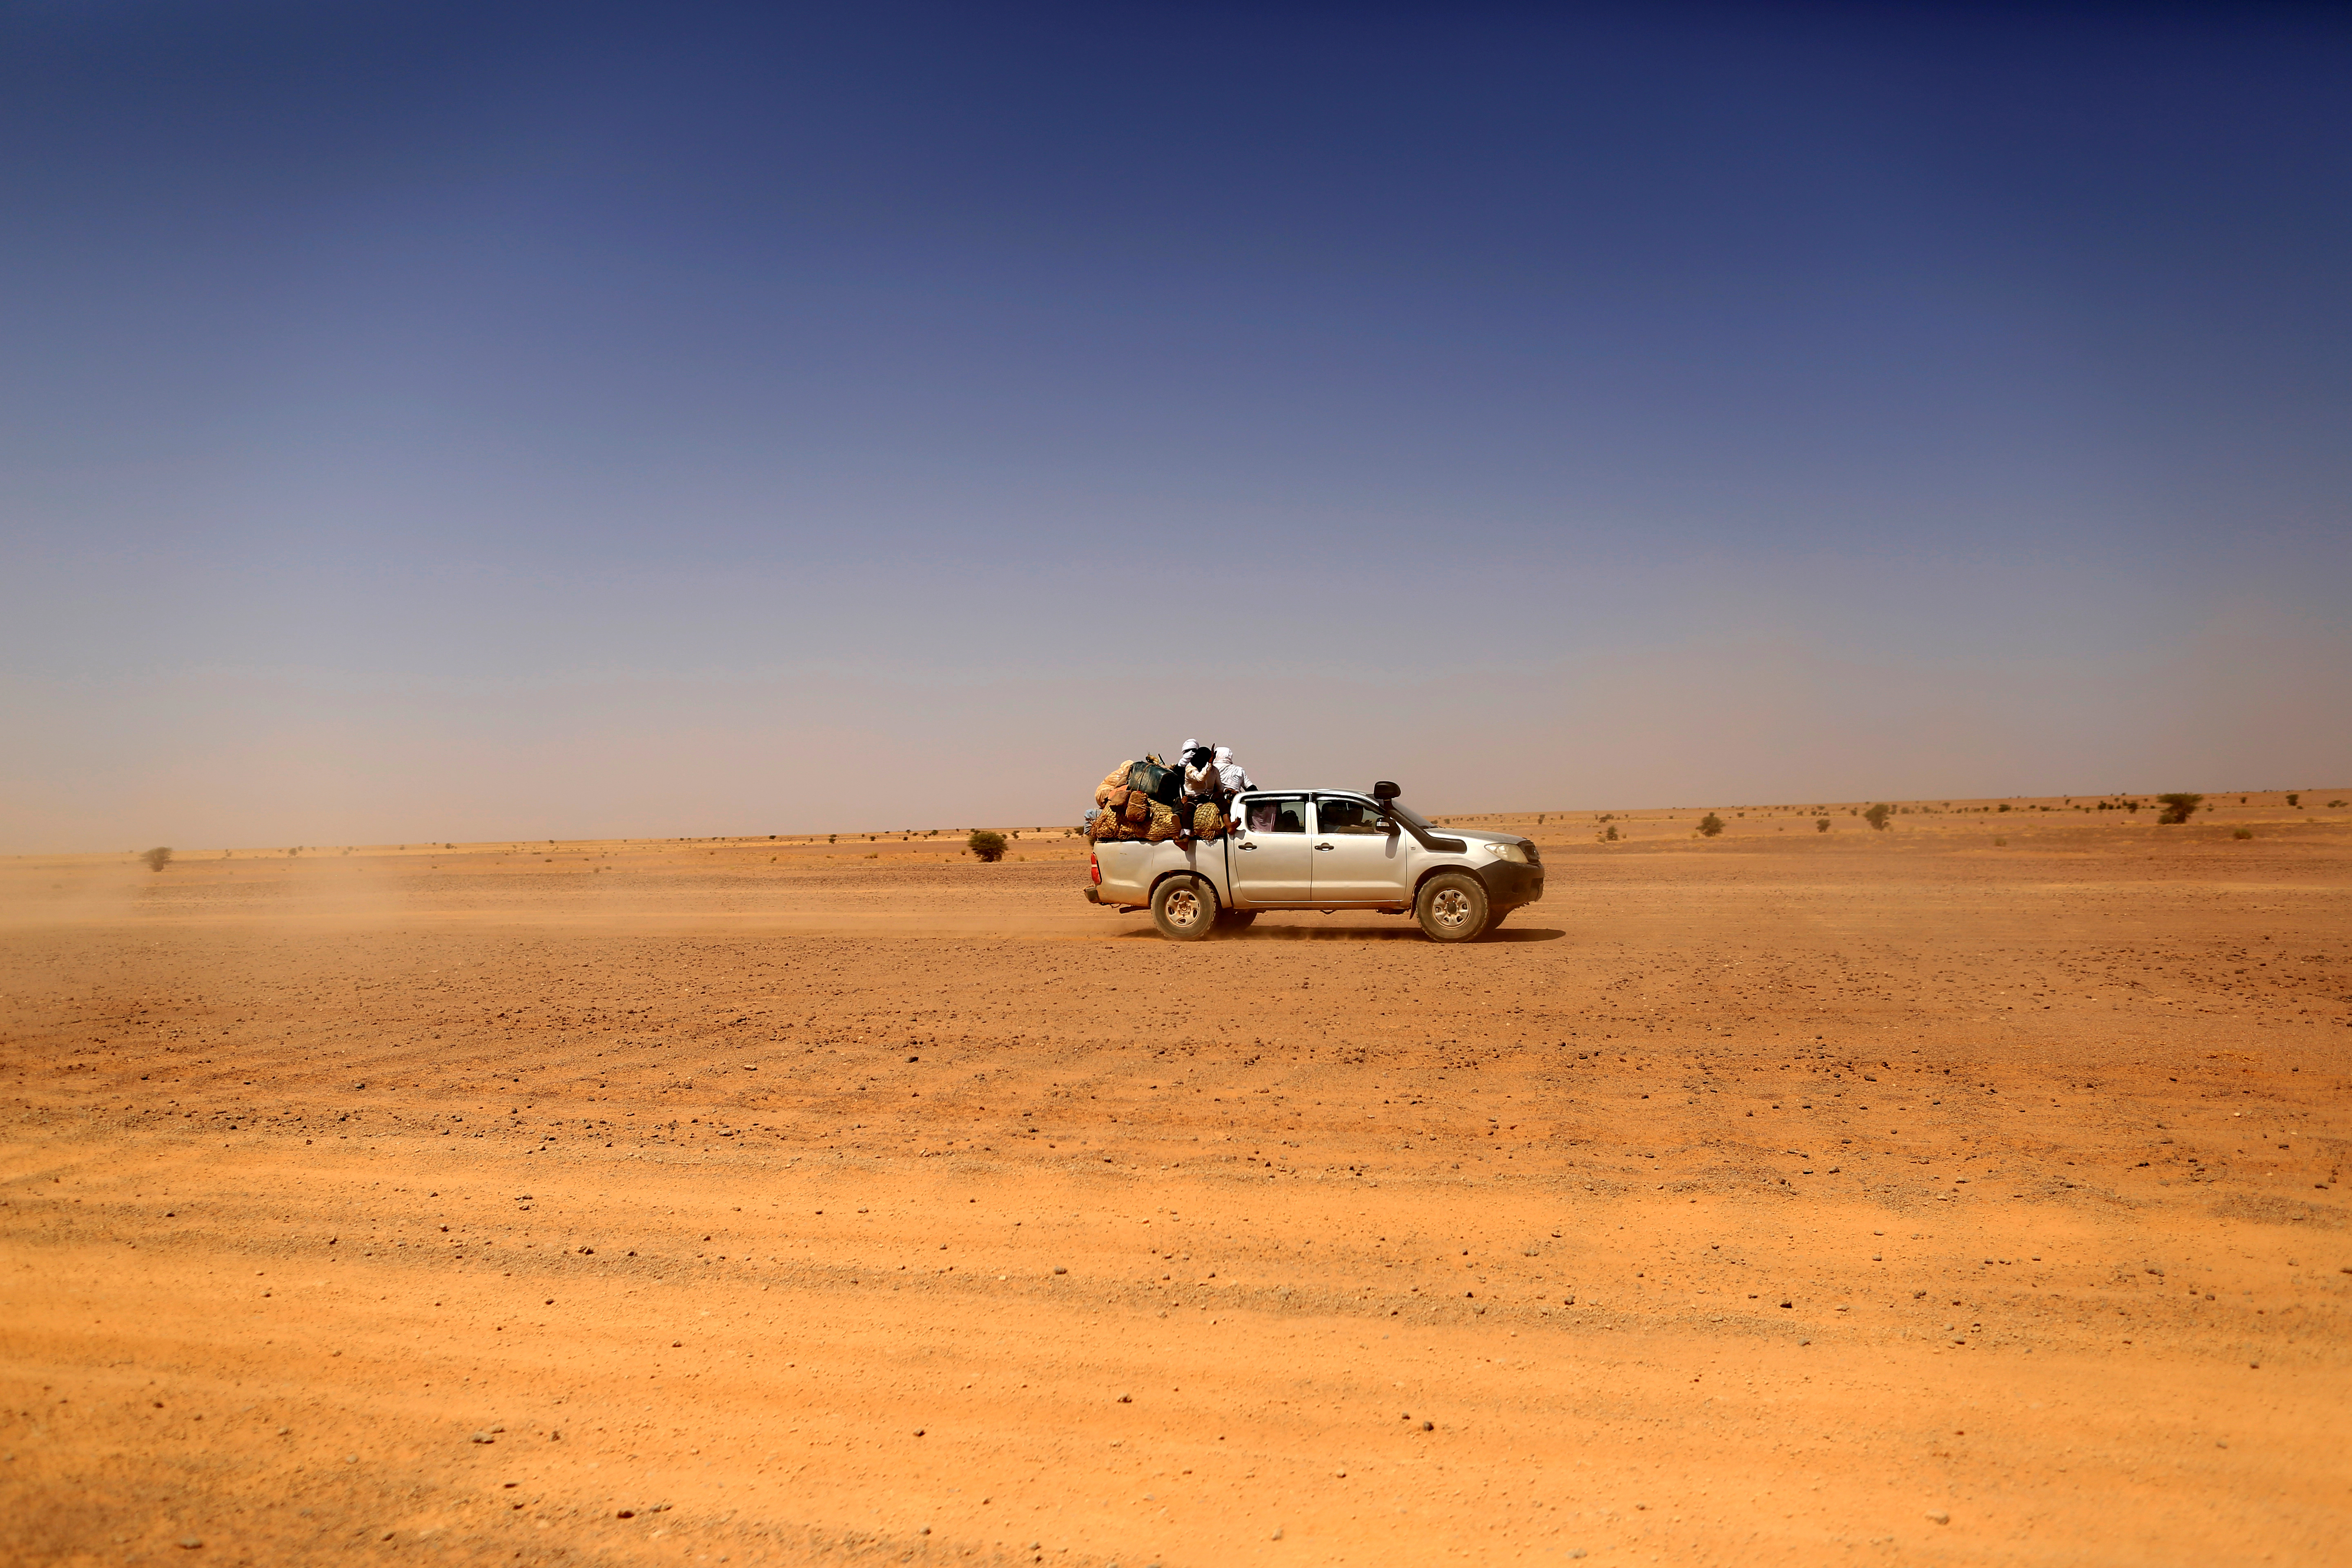 Indigenous Sahrawi people sit on a pick-up truck as they drive towards Tifariti, Western Sahara,